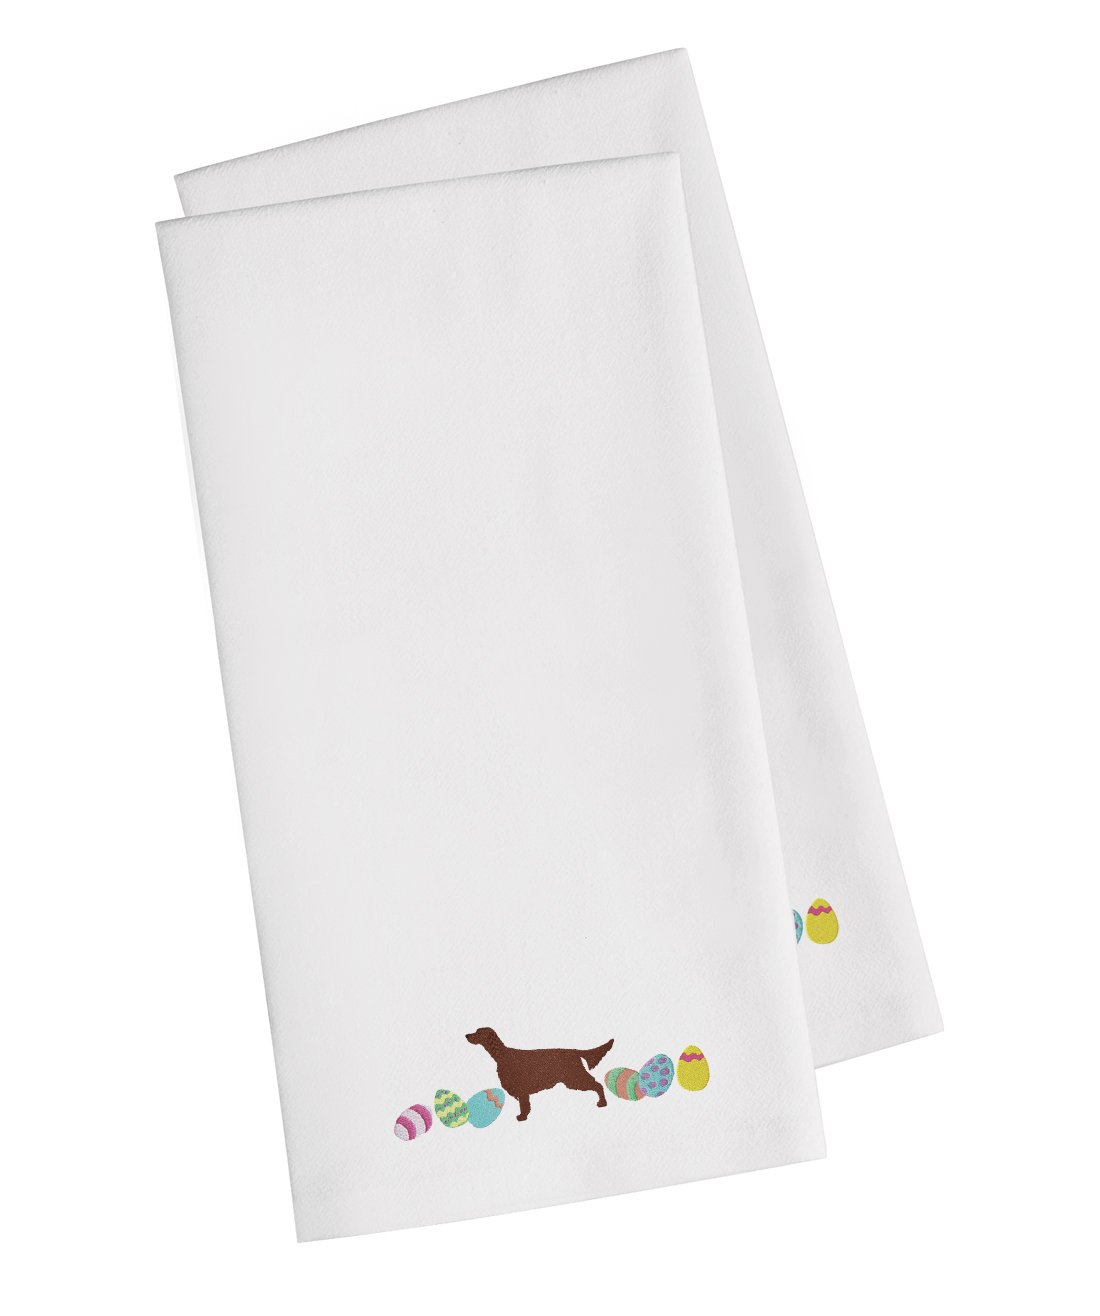 Irish Setter Easter White Embroidered Kitchen Towel Set of 2 CK1652WHTWE by Caroline's Treasures